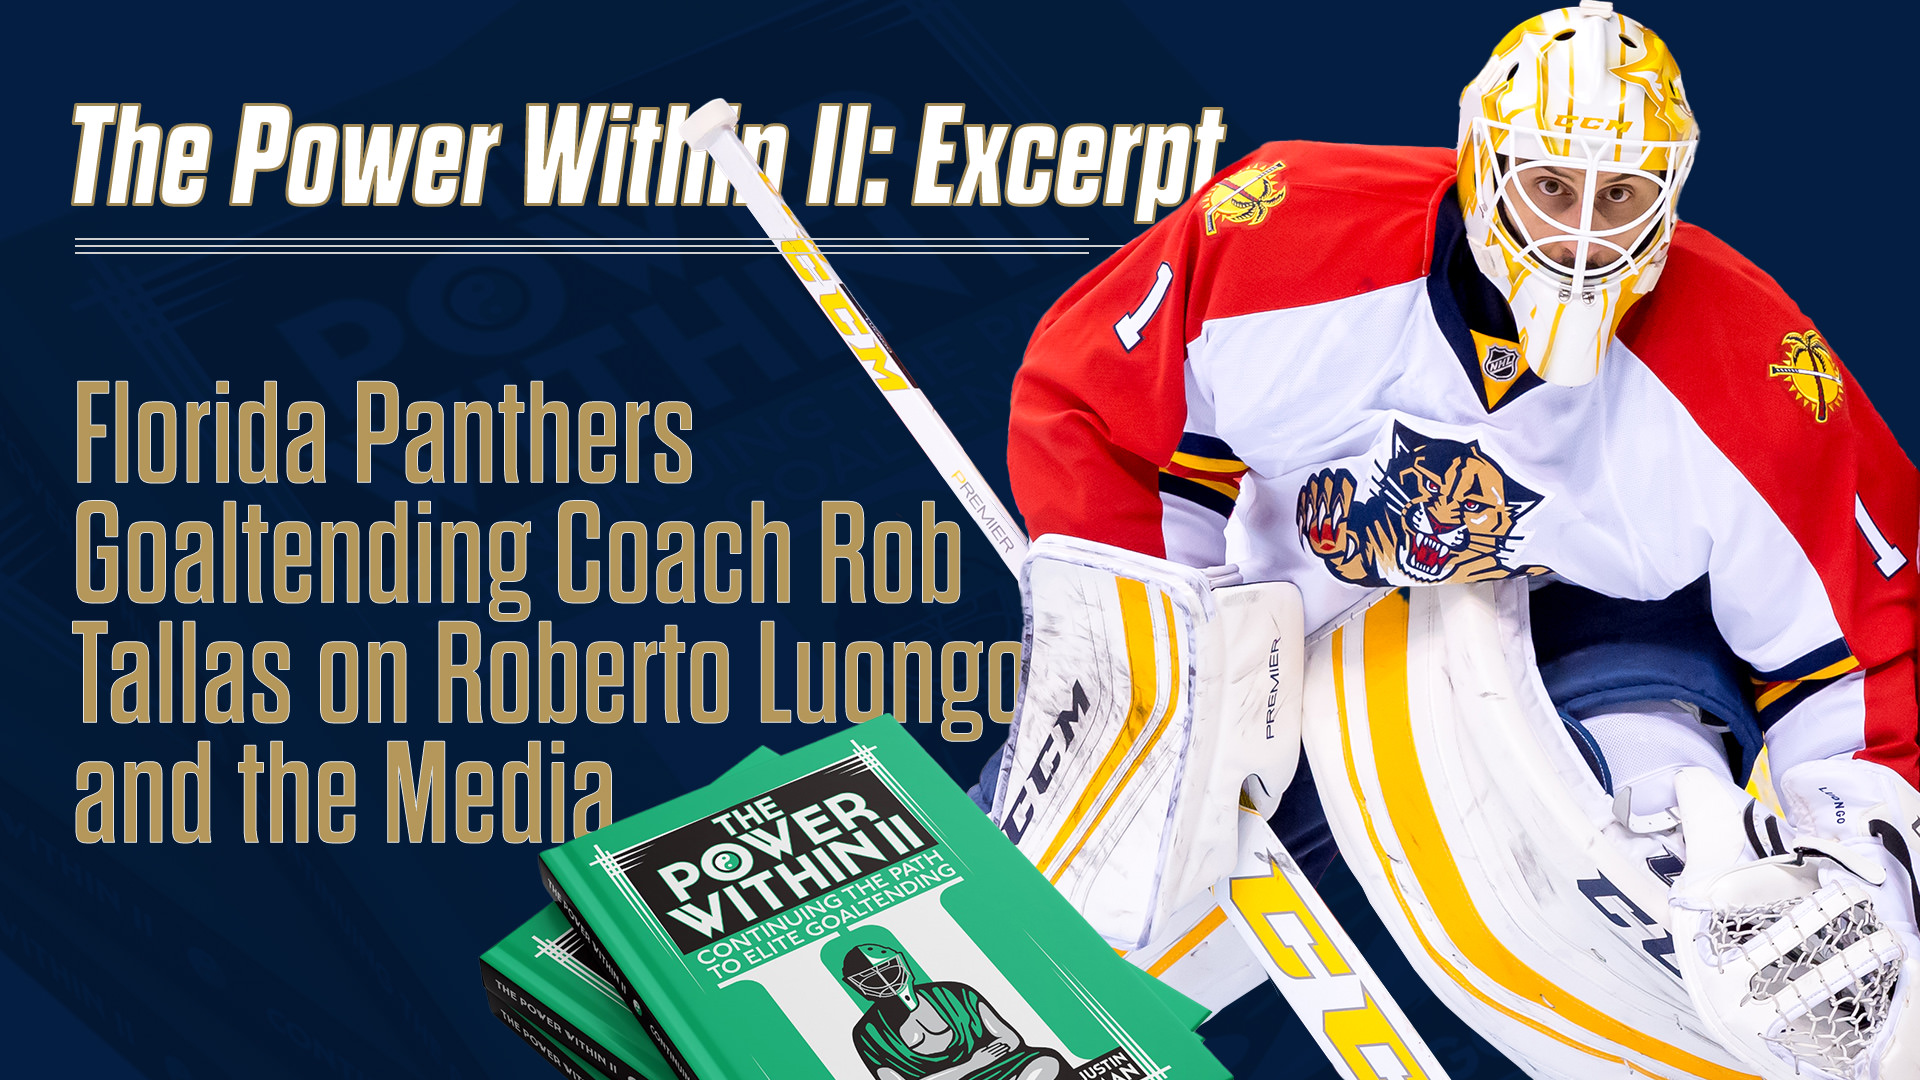 The Power Within II: Excerpt with Florida Panthers Coach Rob Tallas